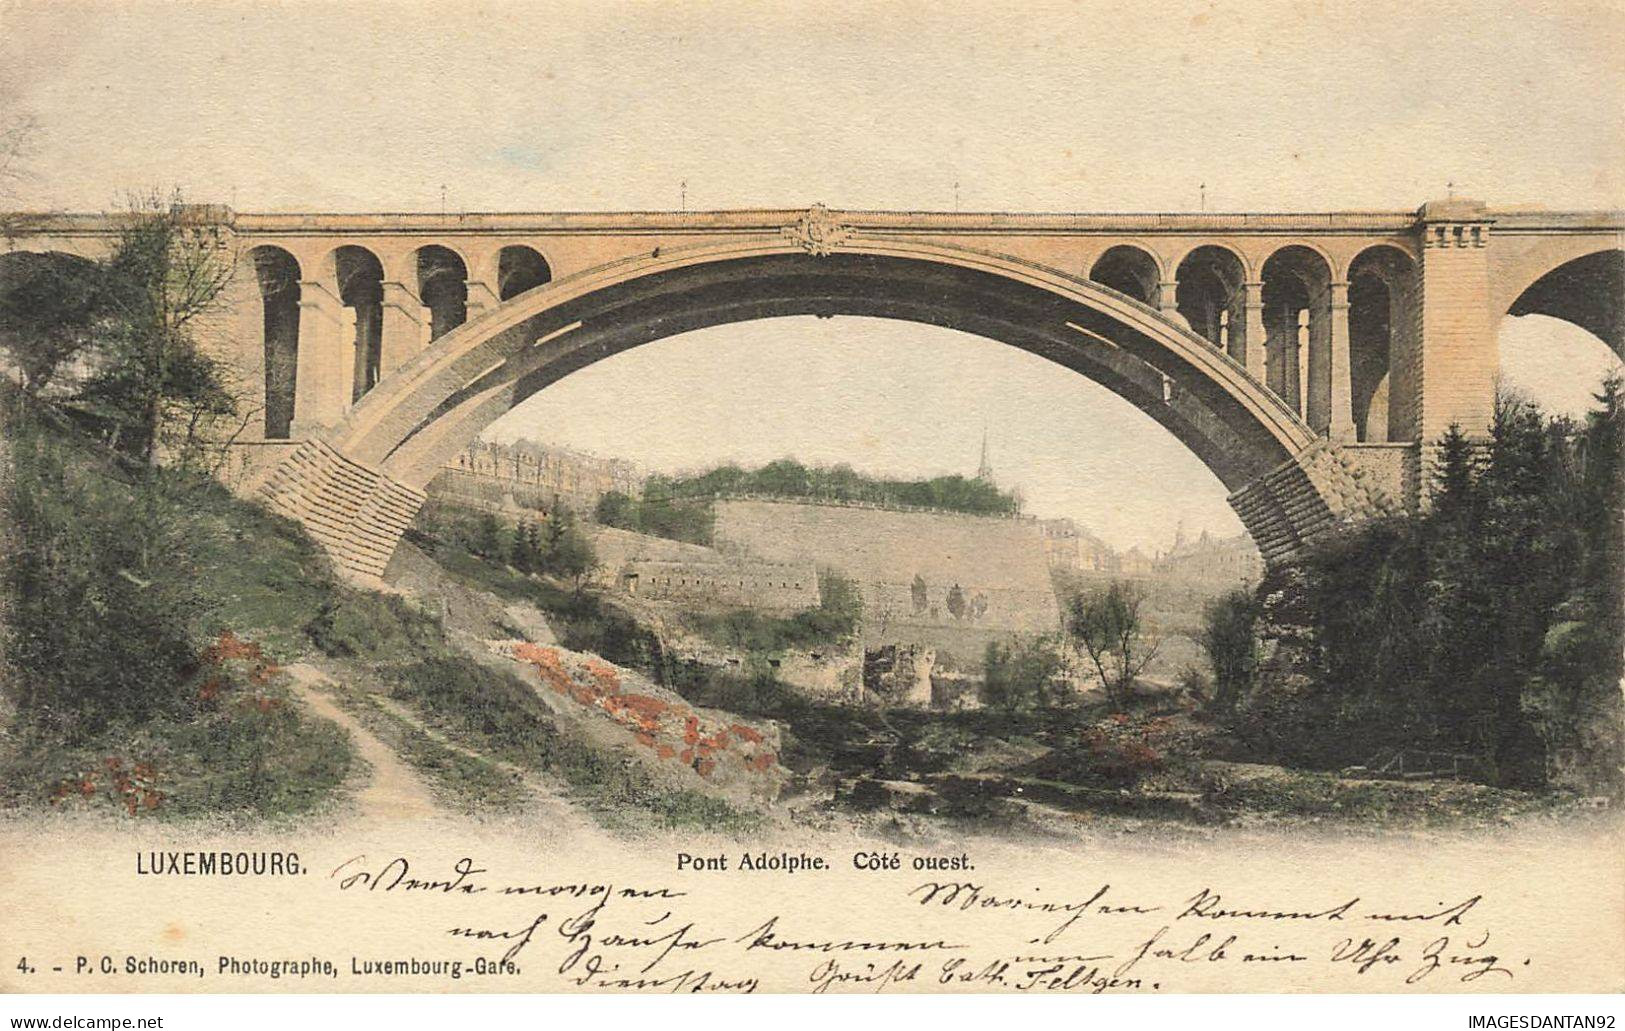 LUXEMBOURG #AS31415 PONT ADOLPHE COTE OUEST LUXEMBOURG - Luxemburgo - Ciudad